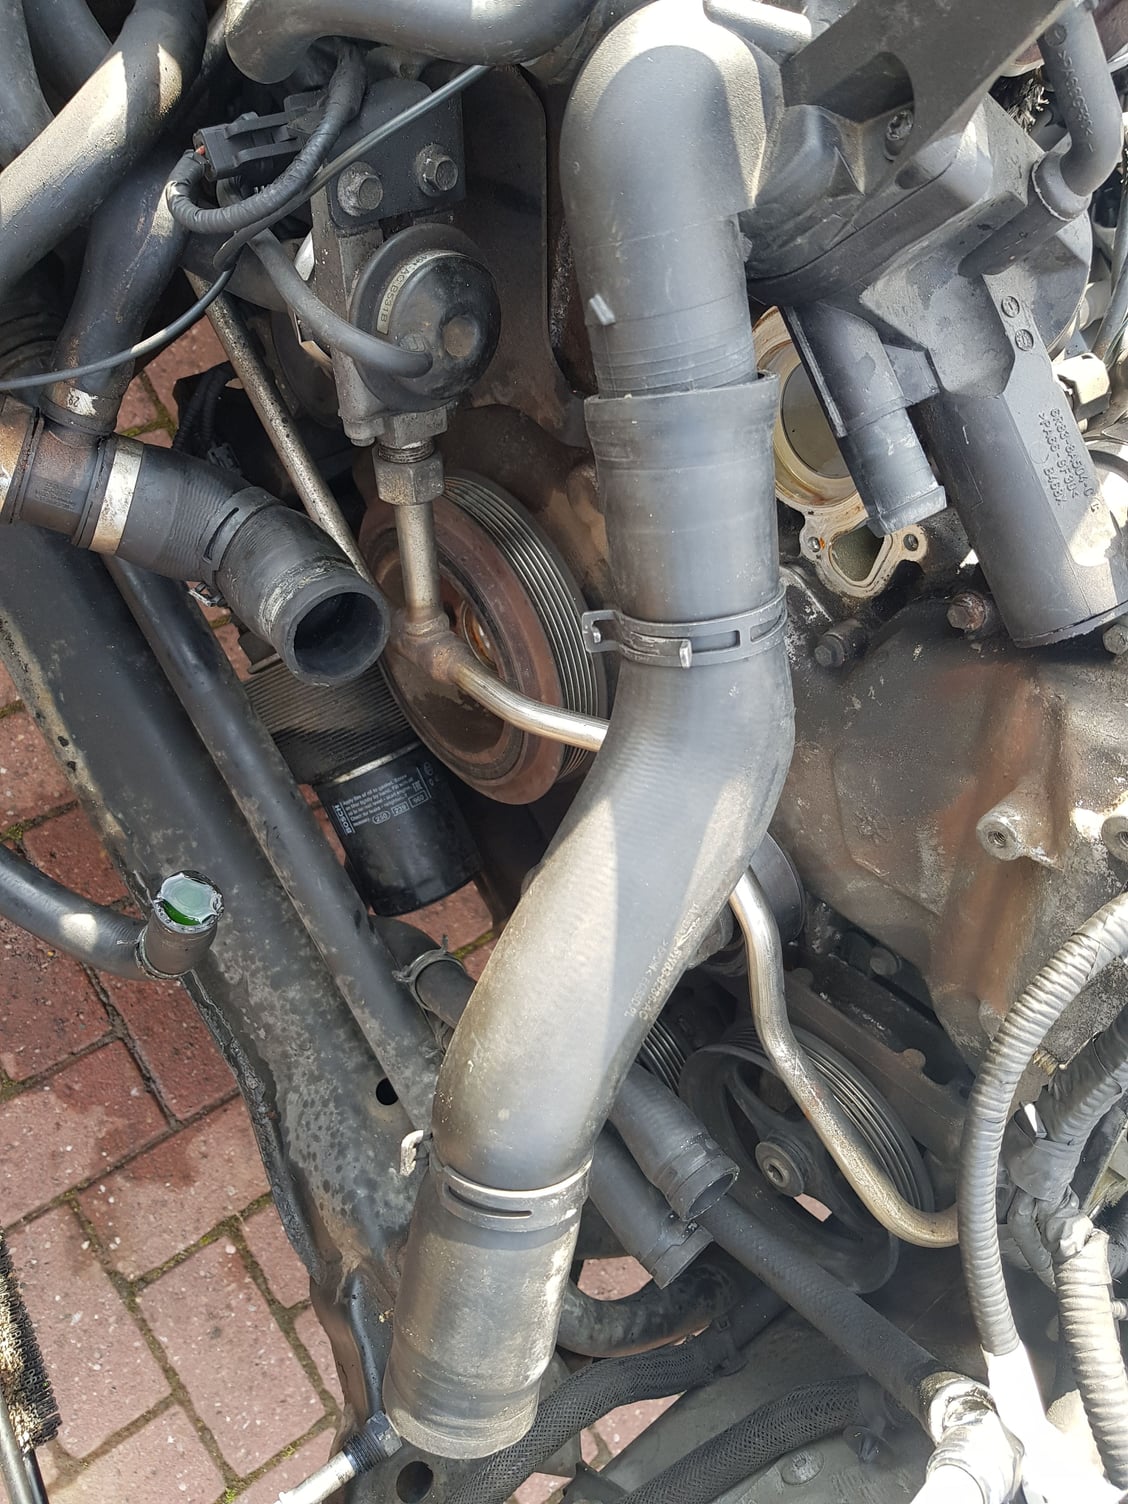 How safe/dangerous is this? Part that holds rear left suspension to frame  seems to have broken loose : r/MechanicAdvice